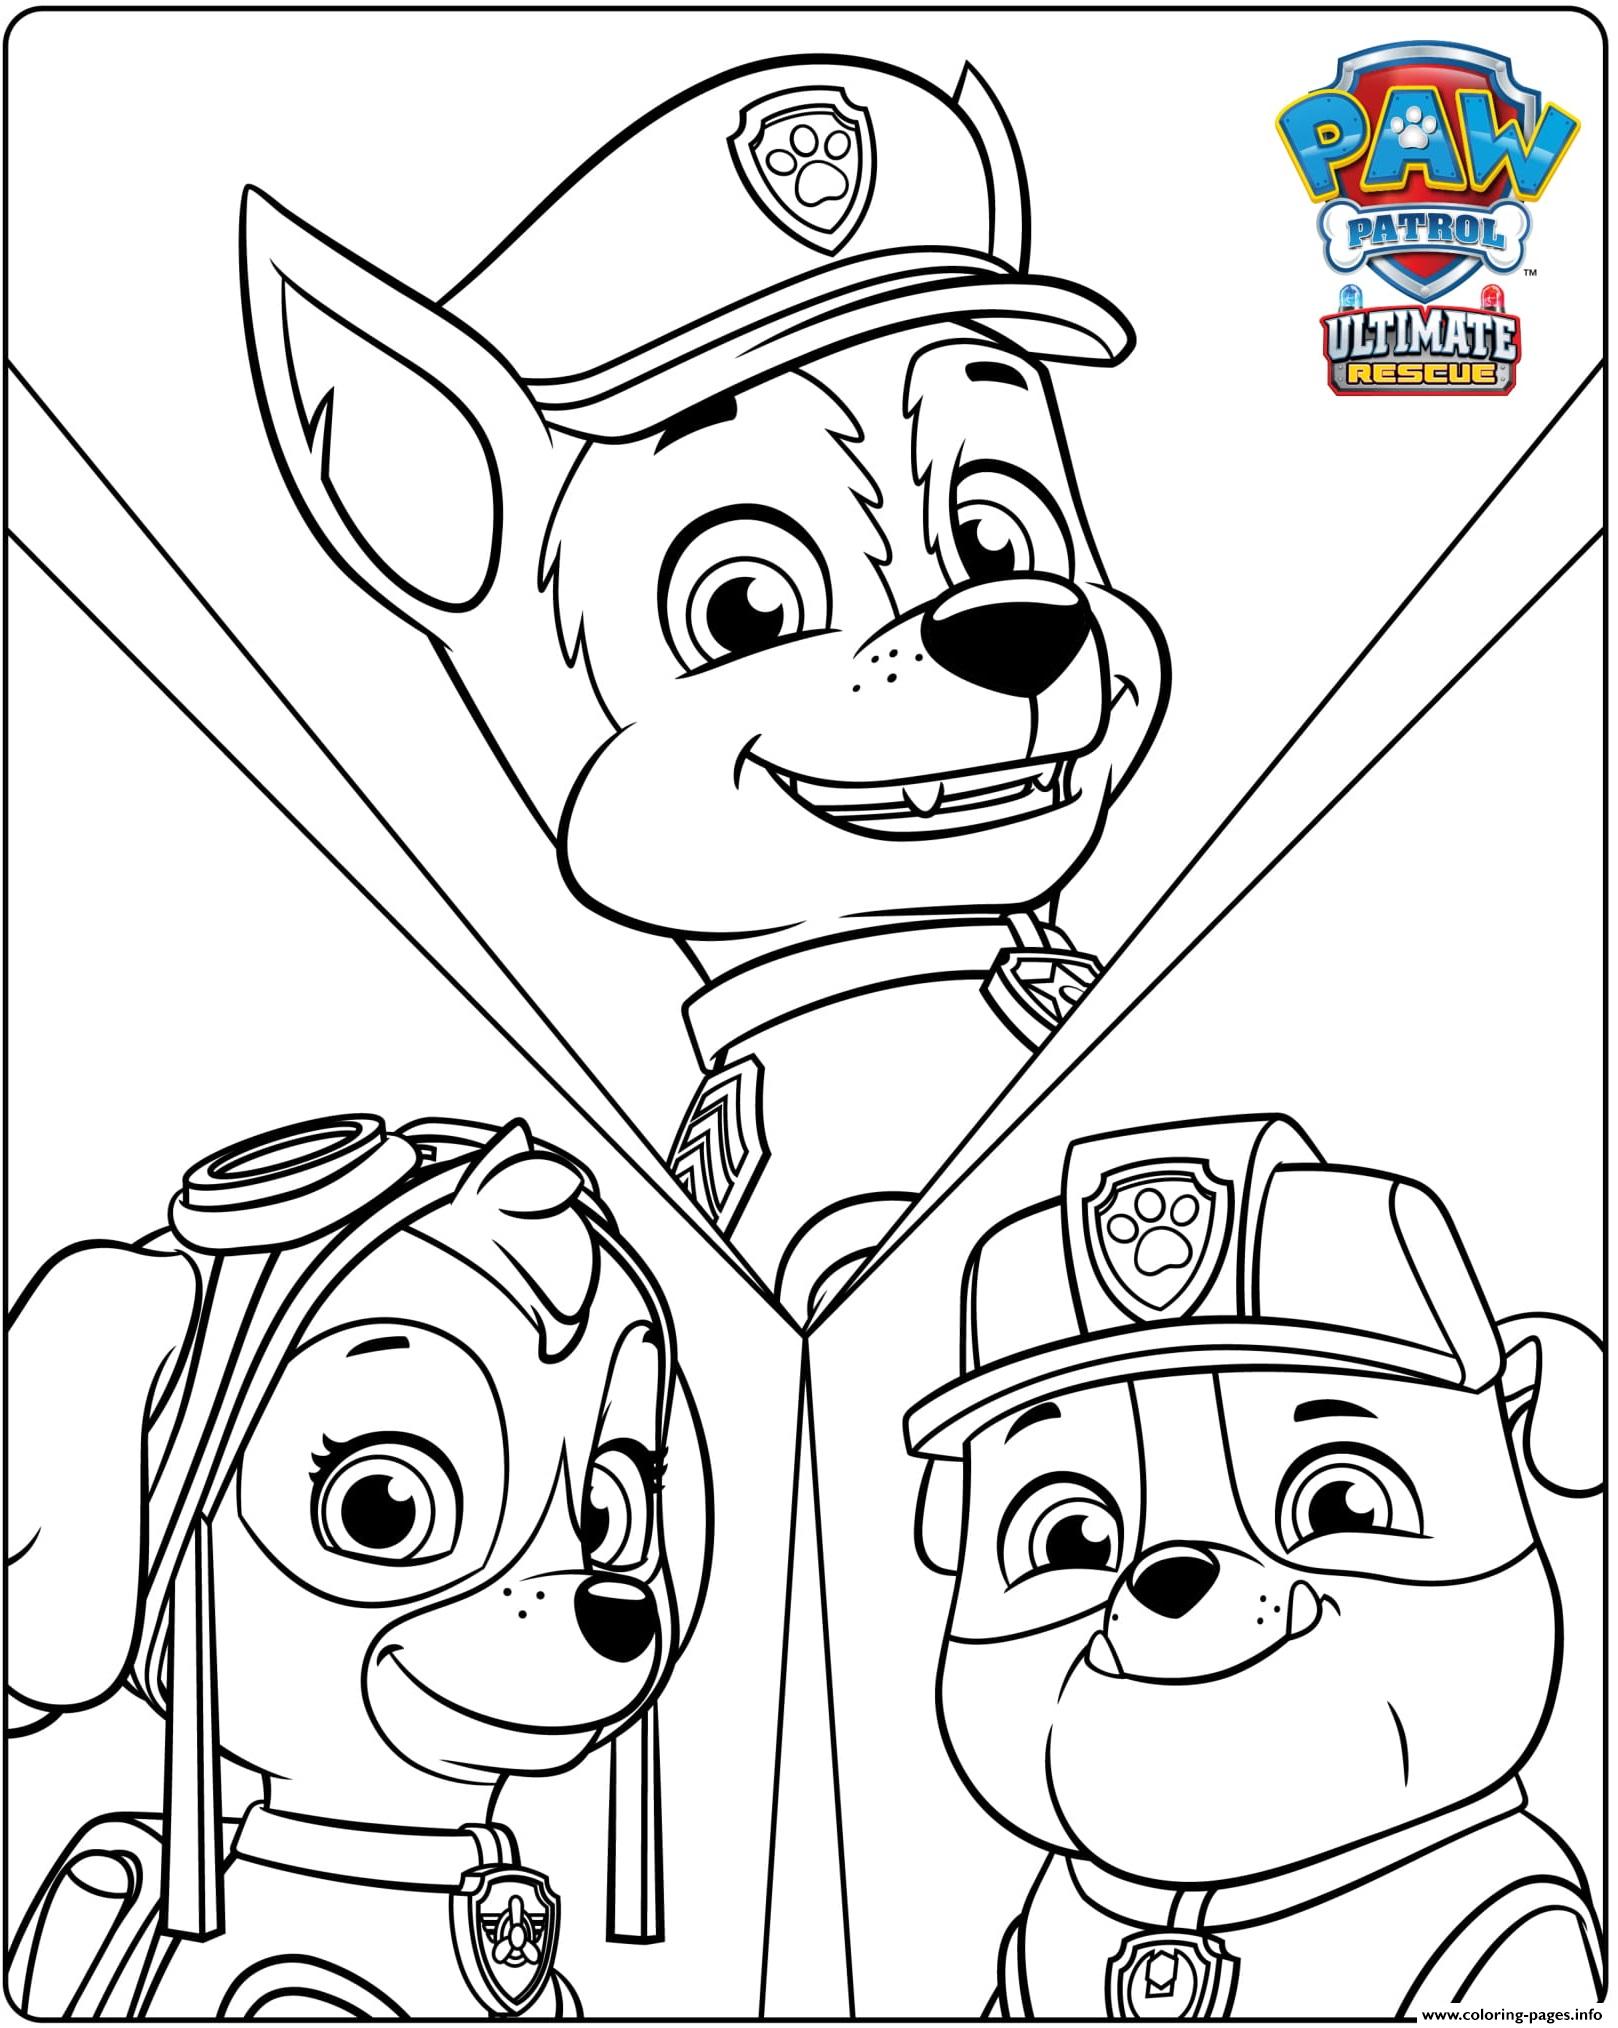 Coloring Pages : Coloring Paw Patrol Ultimate For Kids Printable ...